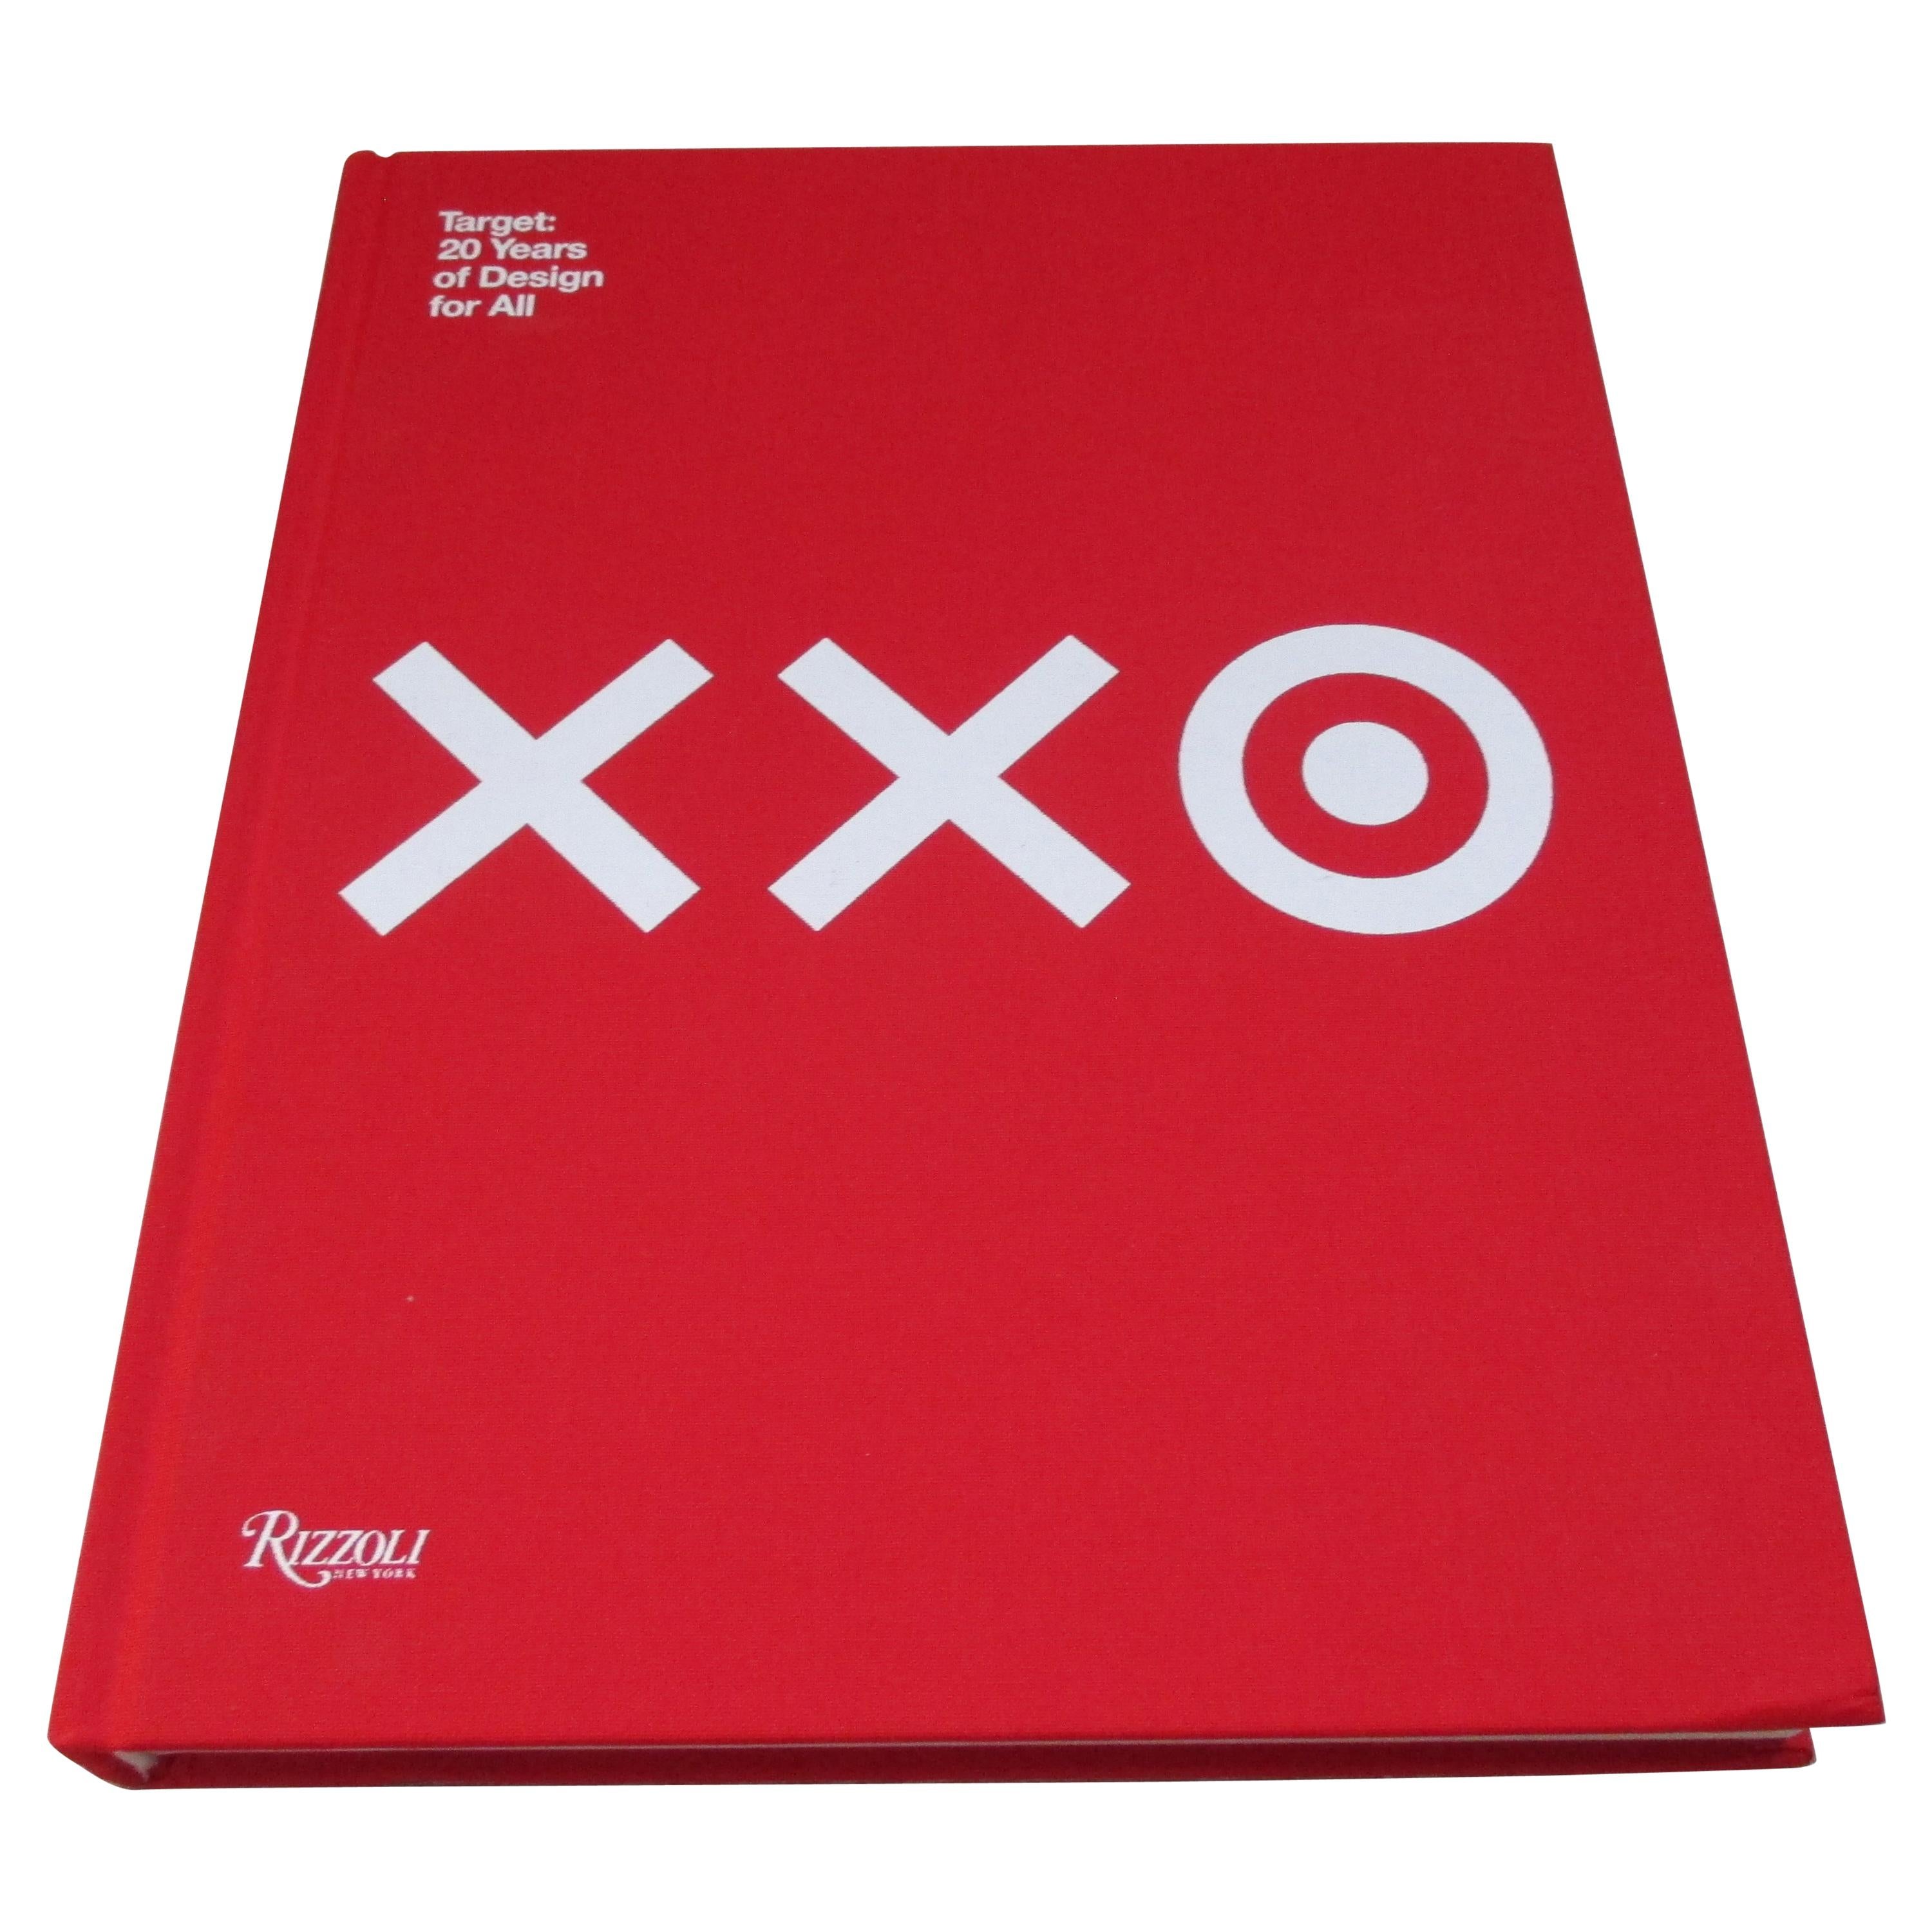 Target 20 Years of Design for All by Rizzoli